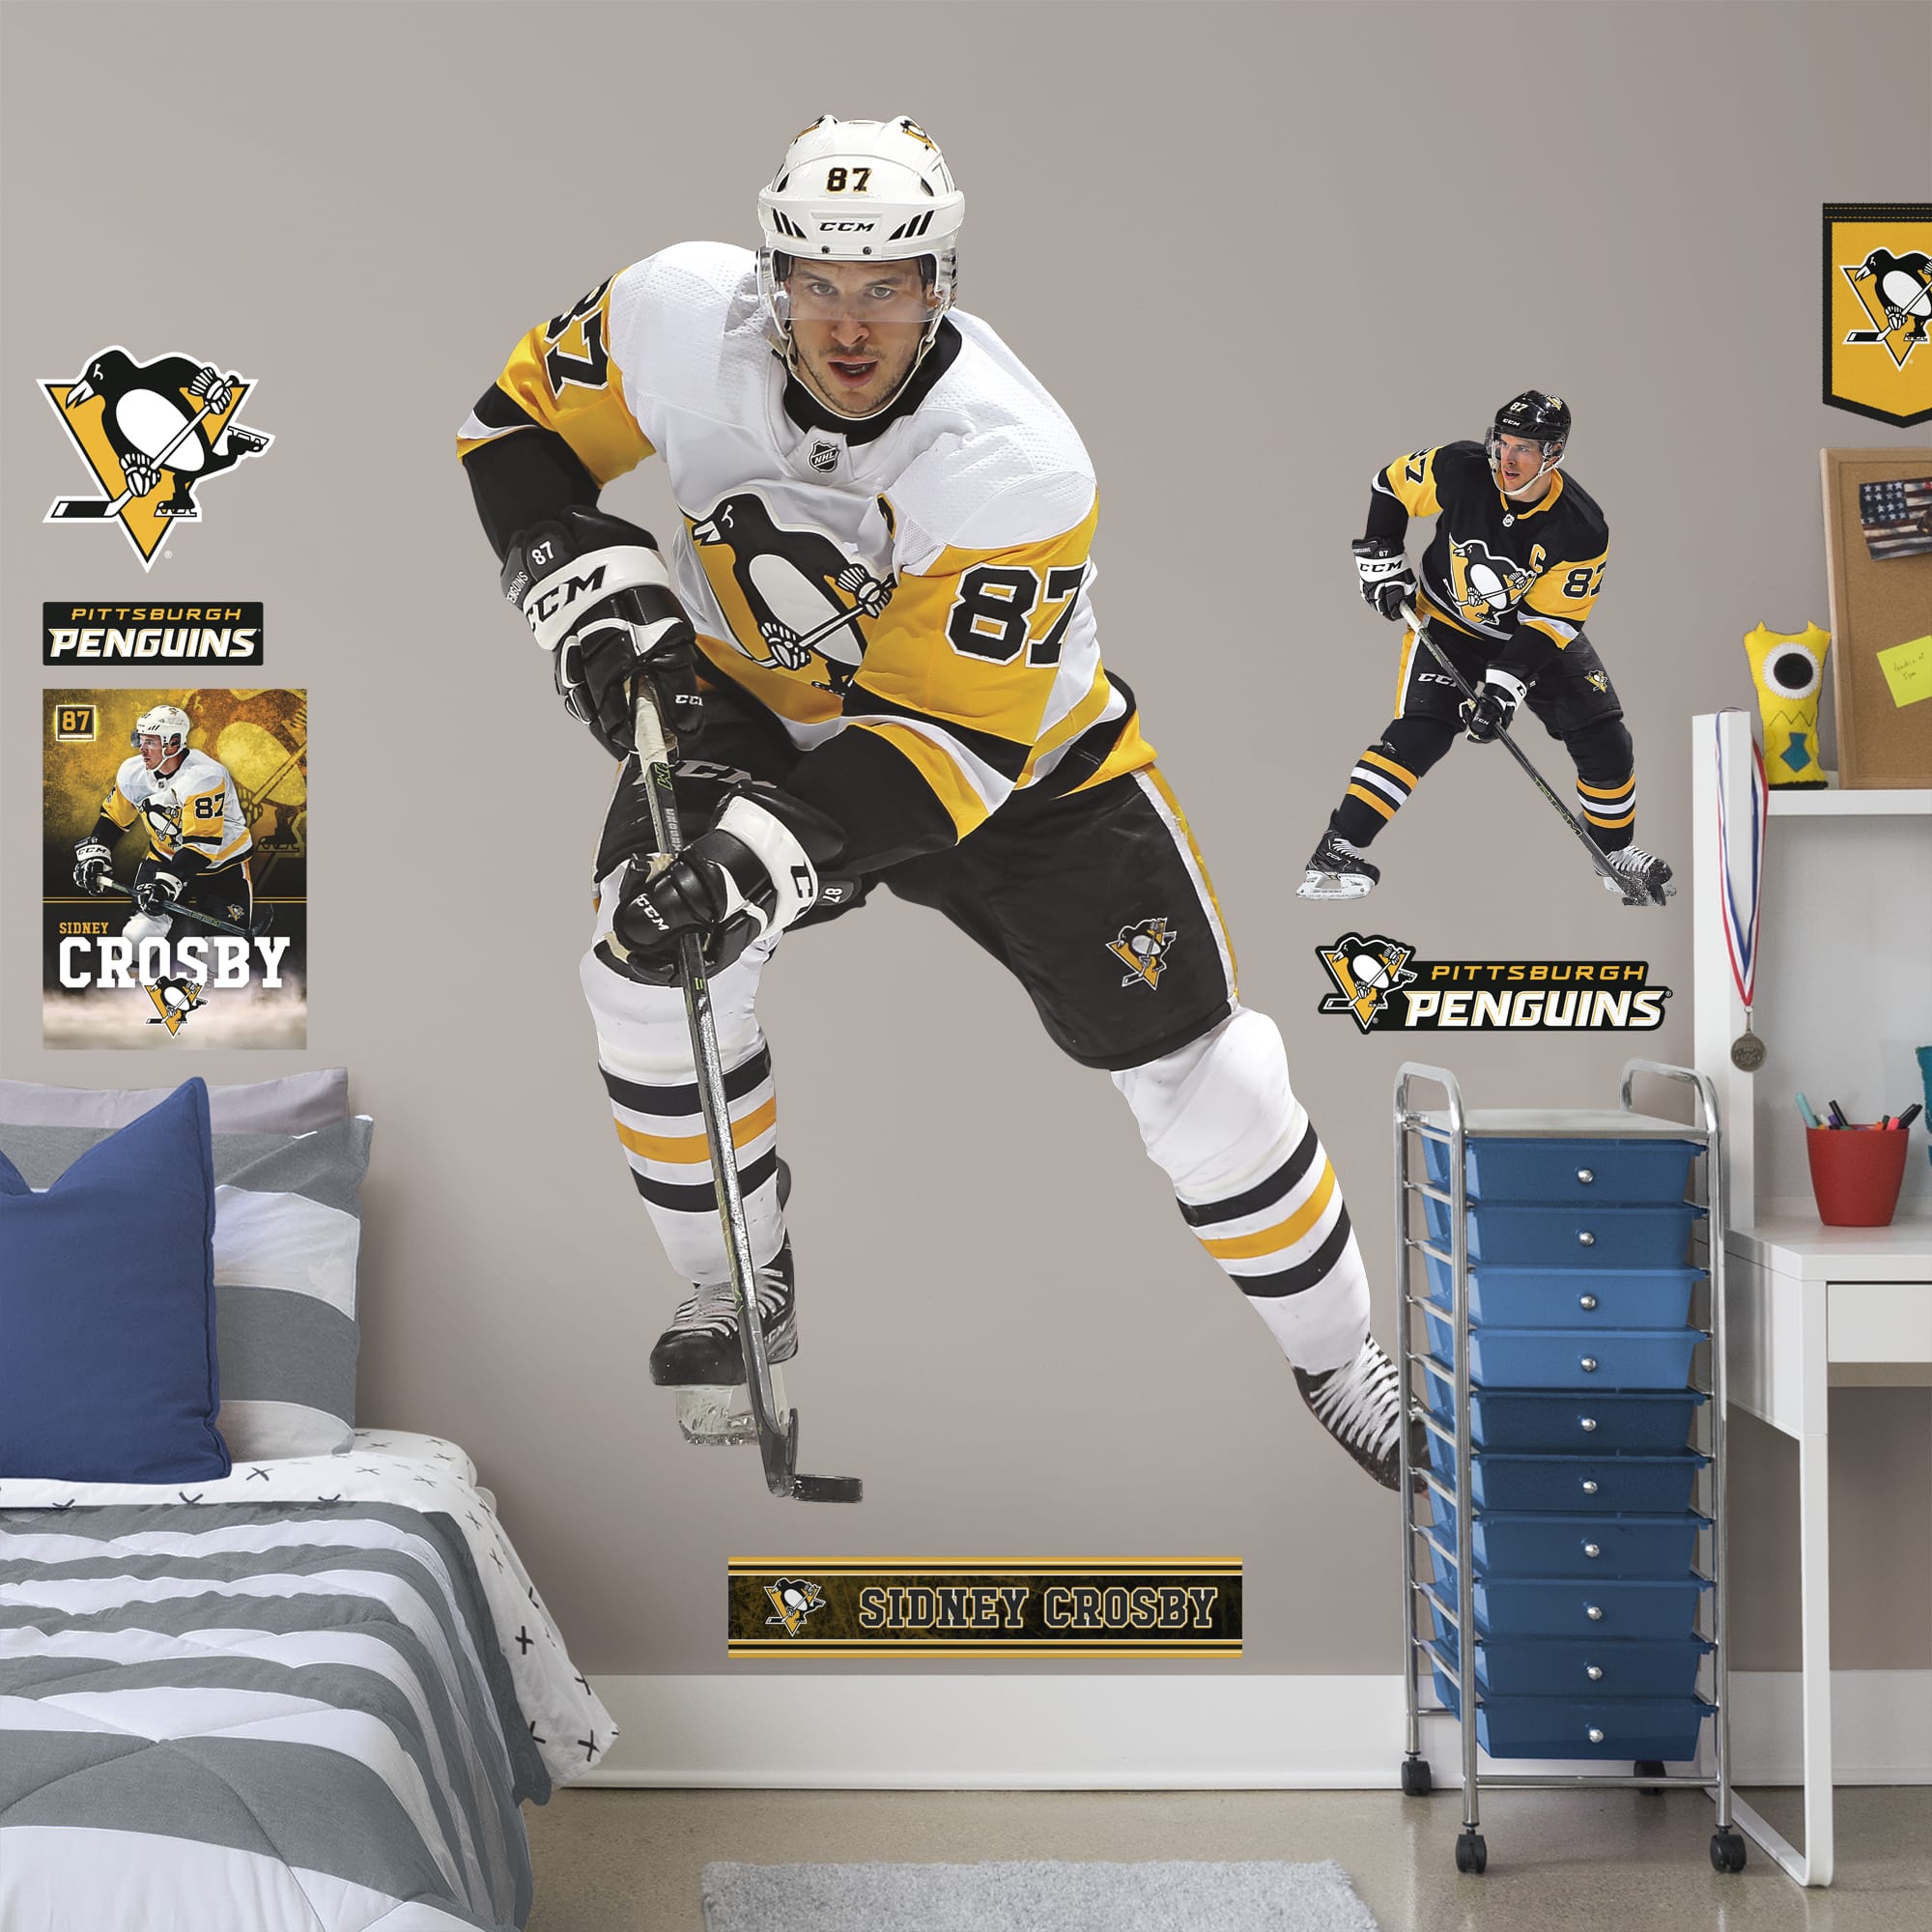 Sidney Crosby for Pittsburgh Penguins - Officially Licensed NHL Removable Wall Decal Life-Size Athlete + 9 Decals (52"W x 72"H)